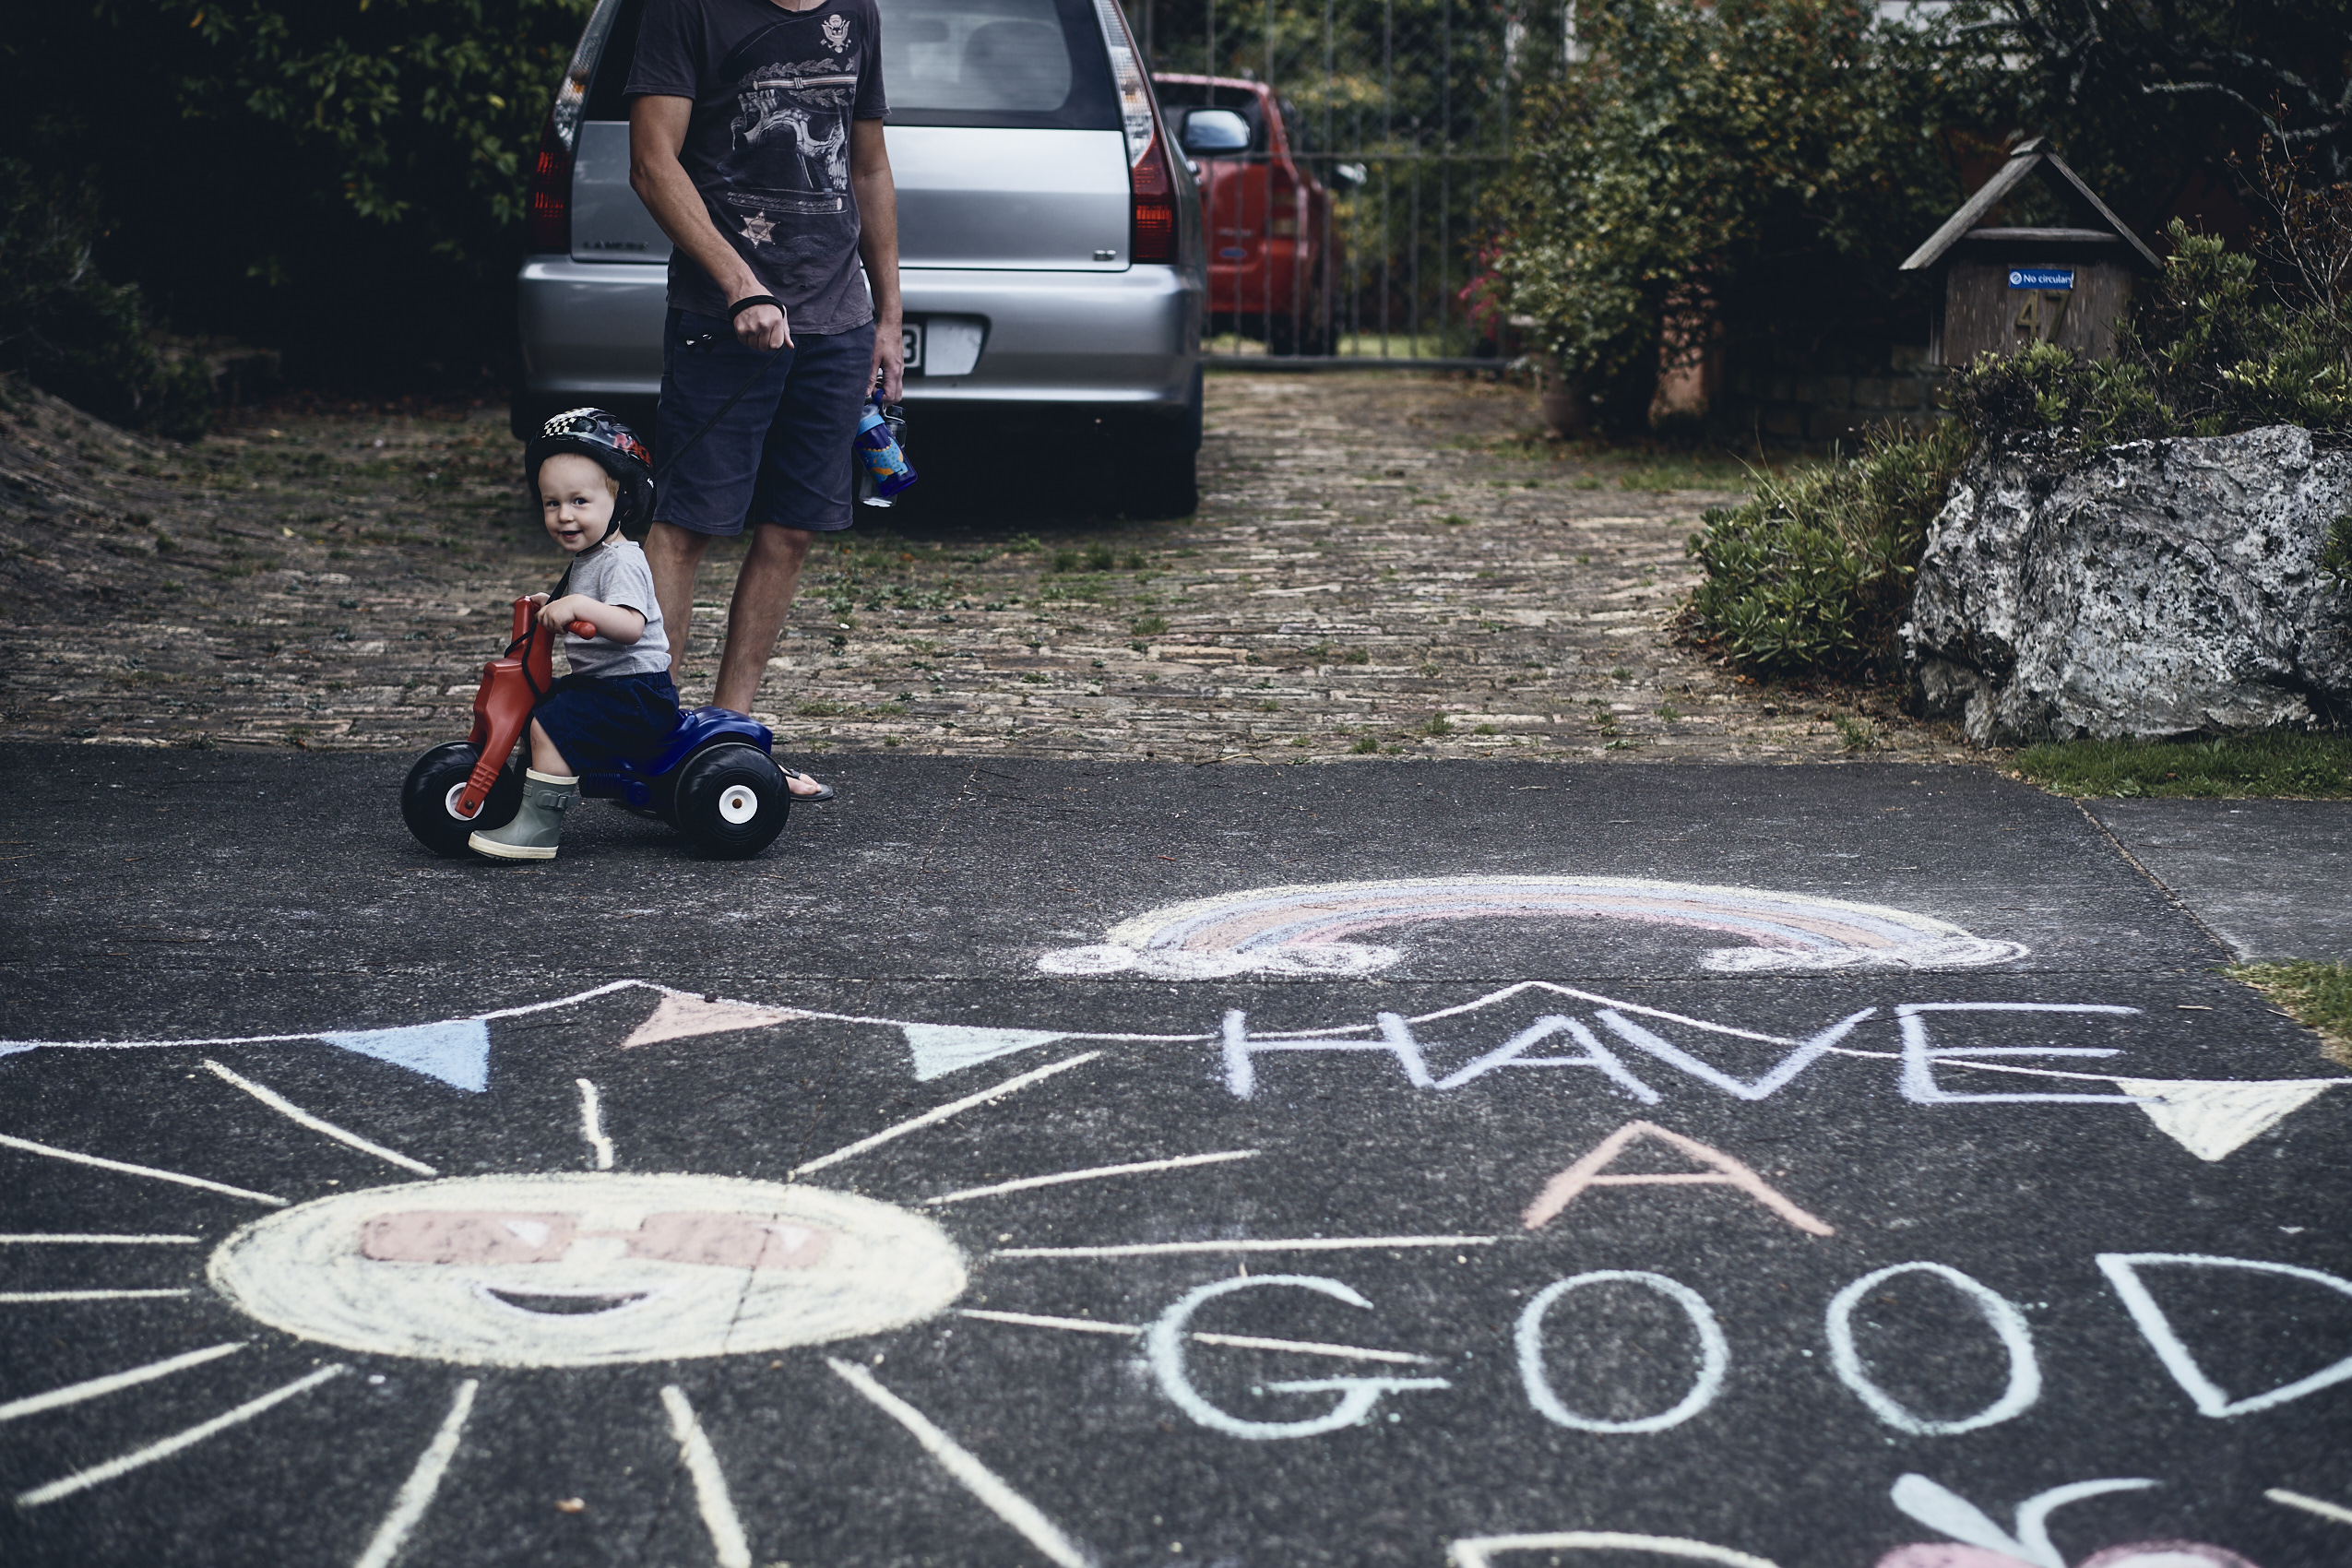 Lockdown • Chalk Drawing & Little Boy on Tricycle • Lifestyle & Portrait Photography